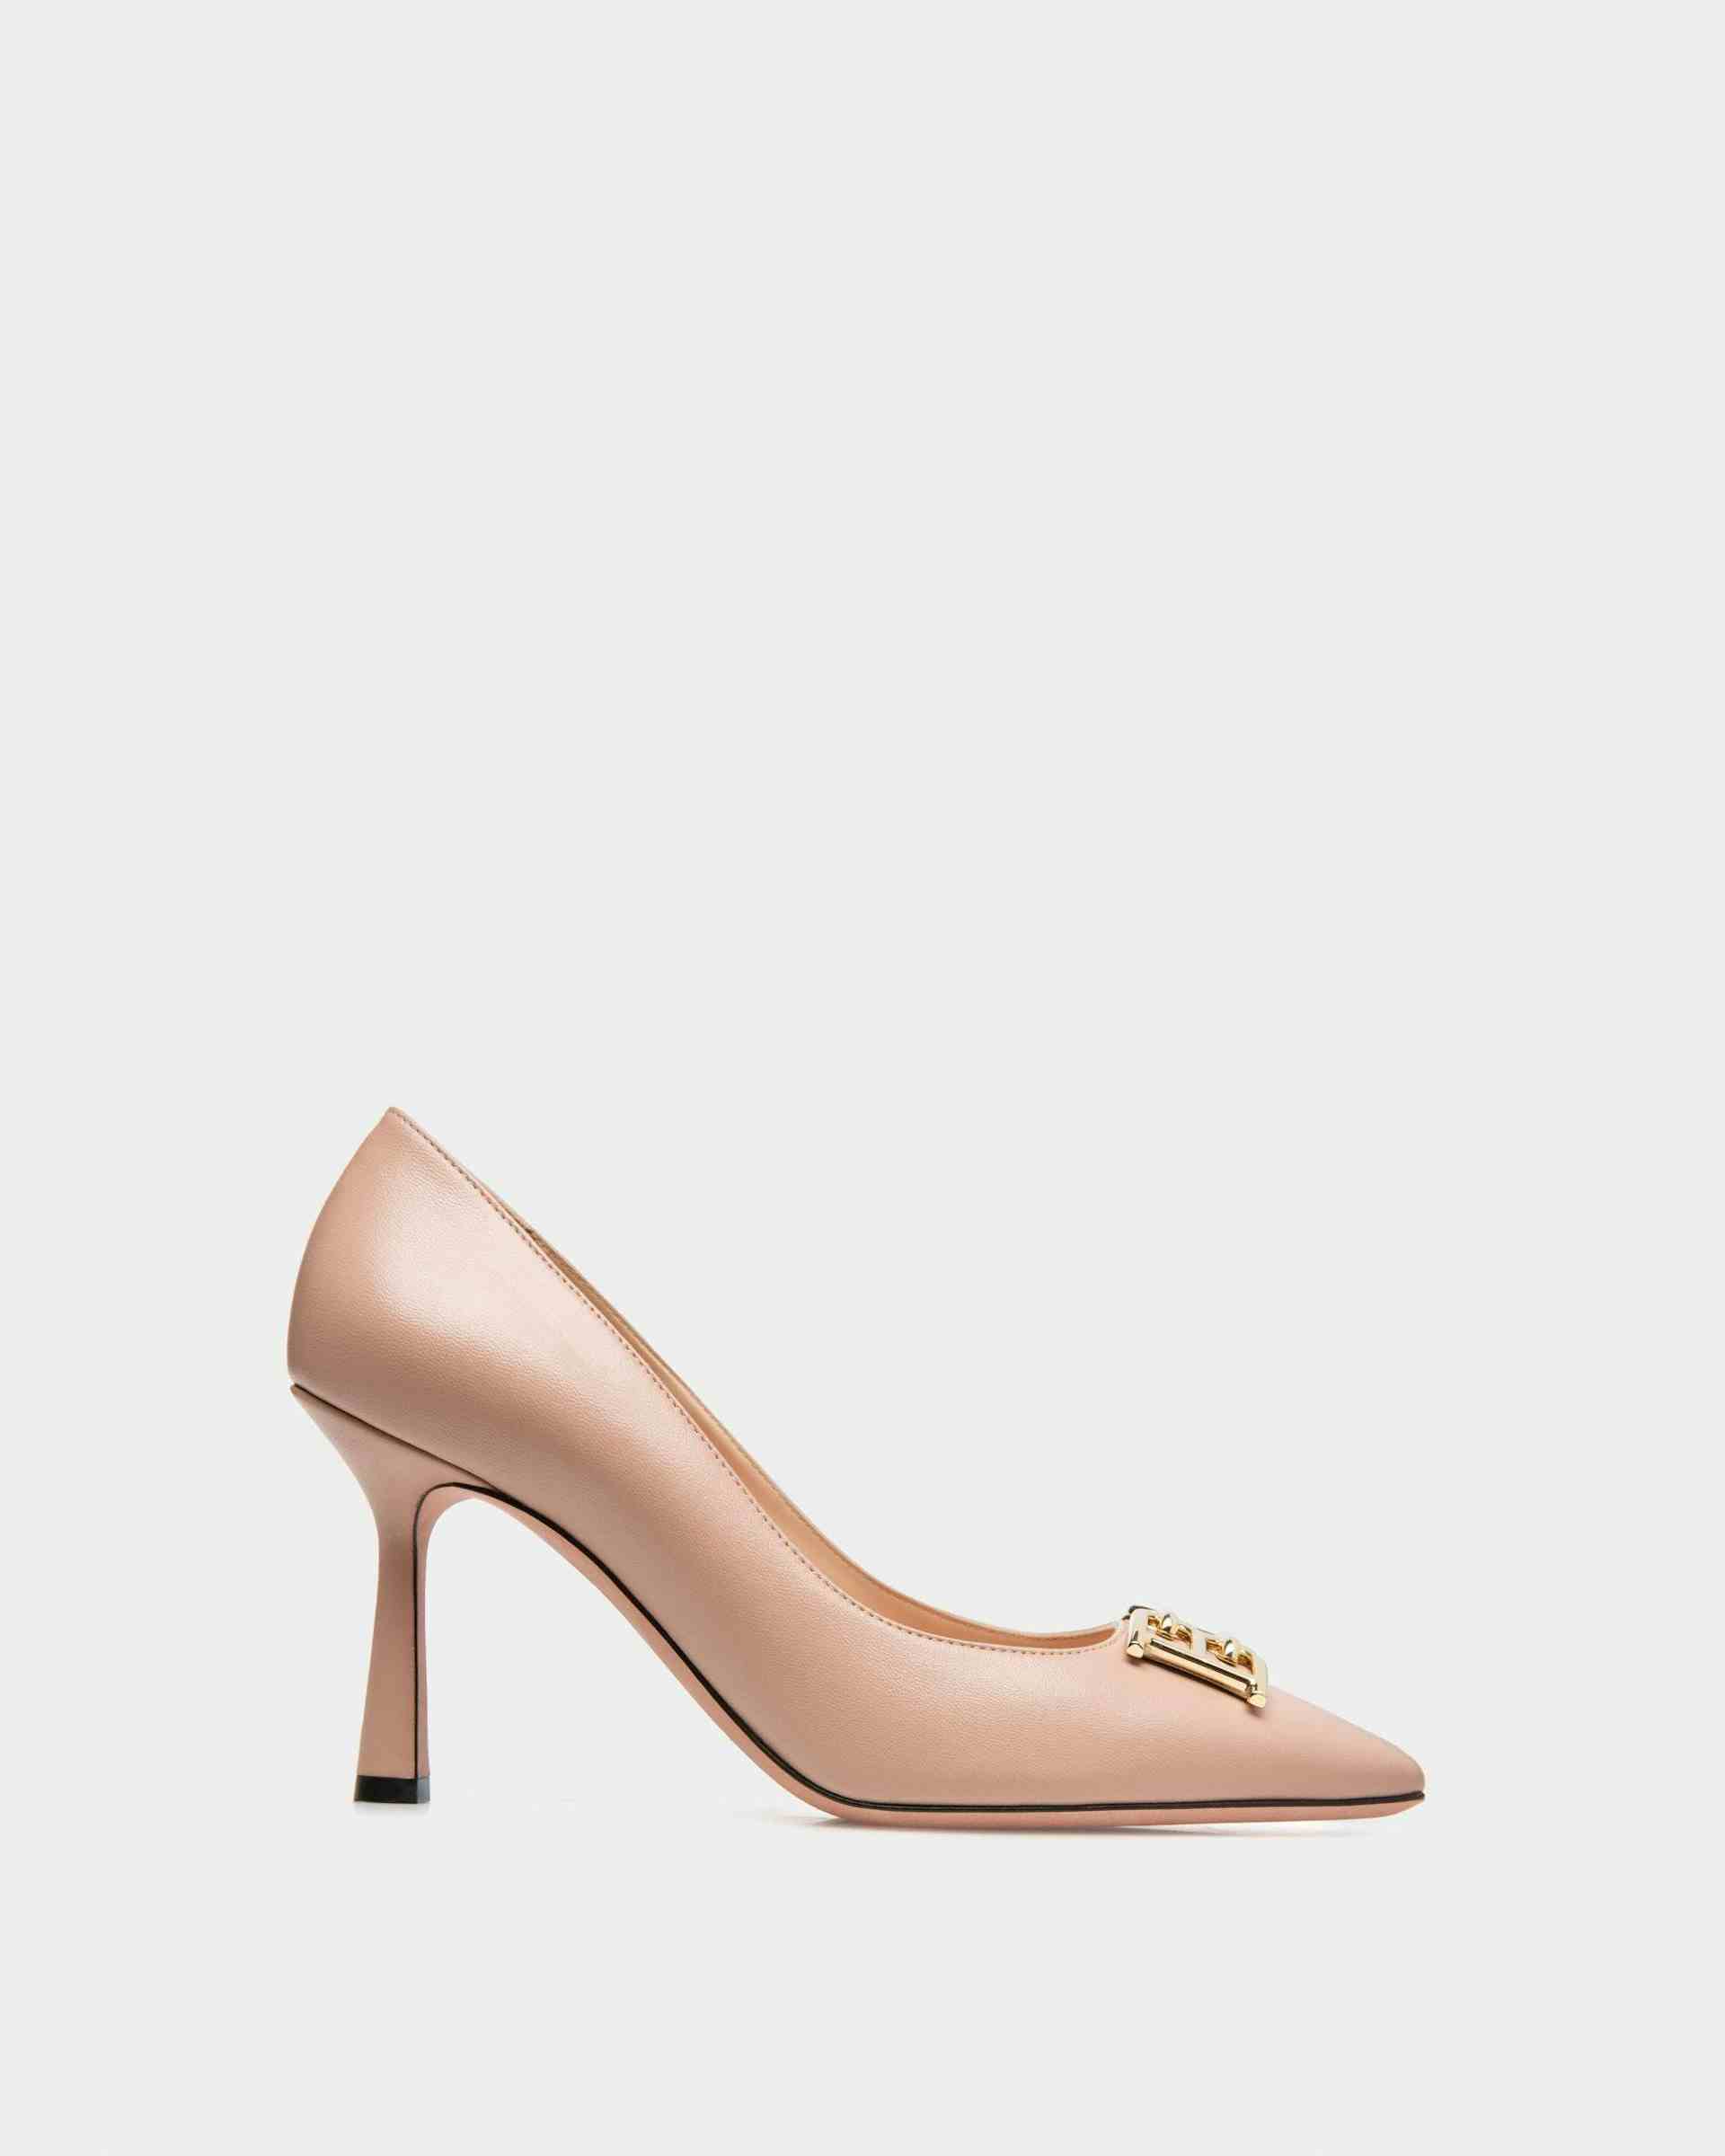 Evanca Leather Pumps In Pale Pink - Women's - Bally